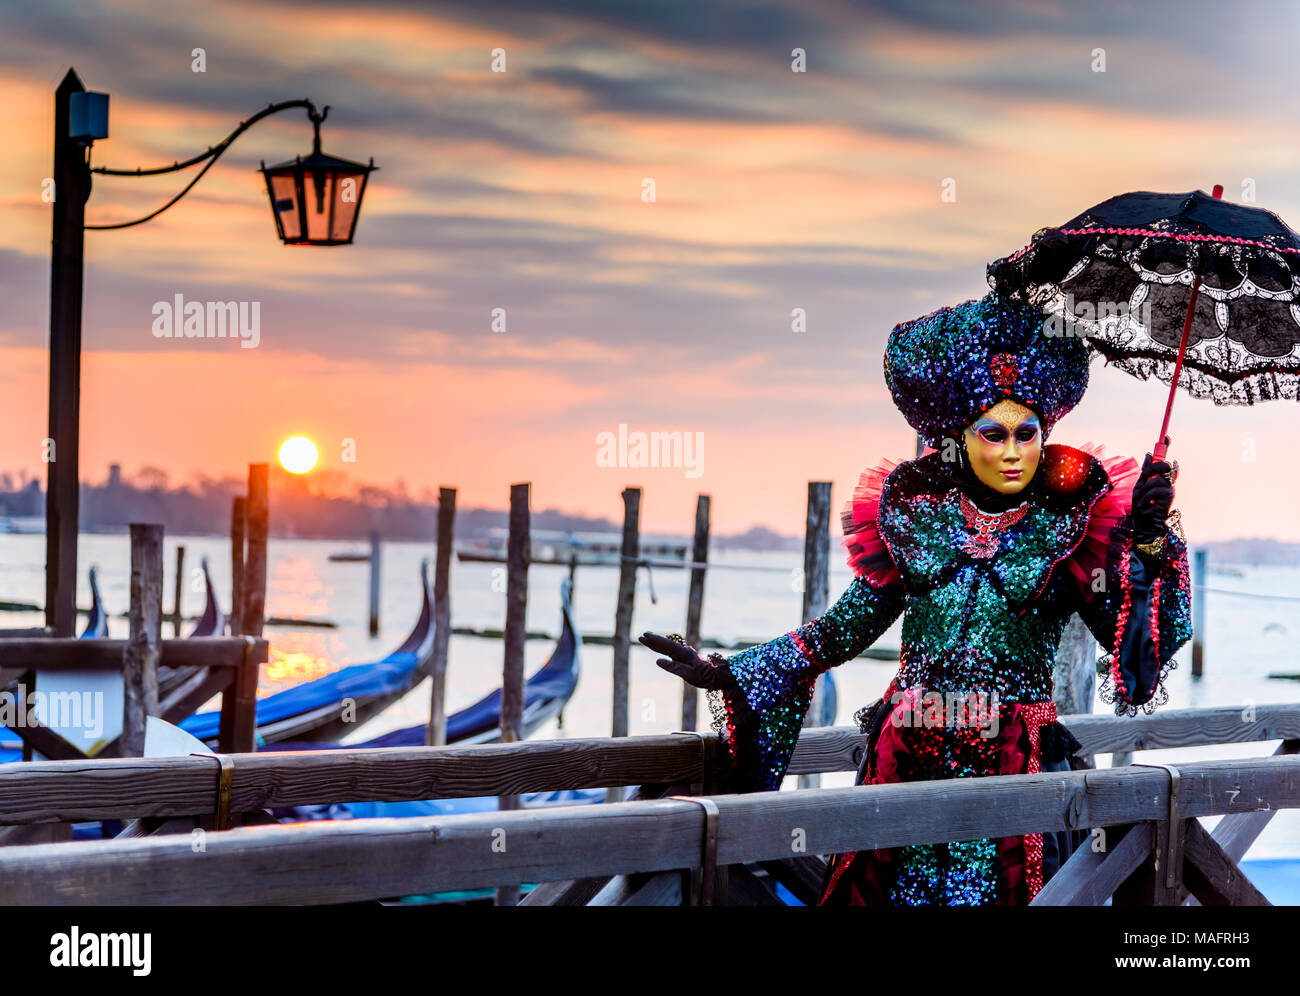 Venice, Italy - 11th February 2018: Carnival of Venice, beautiful mask at Mark's Square with St. George island in the background. Stock Photo